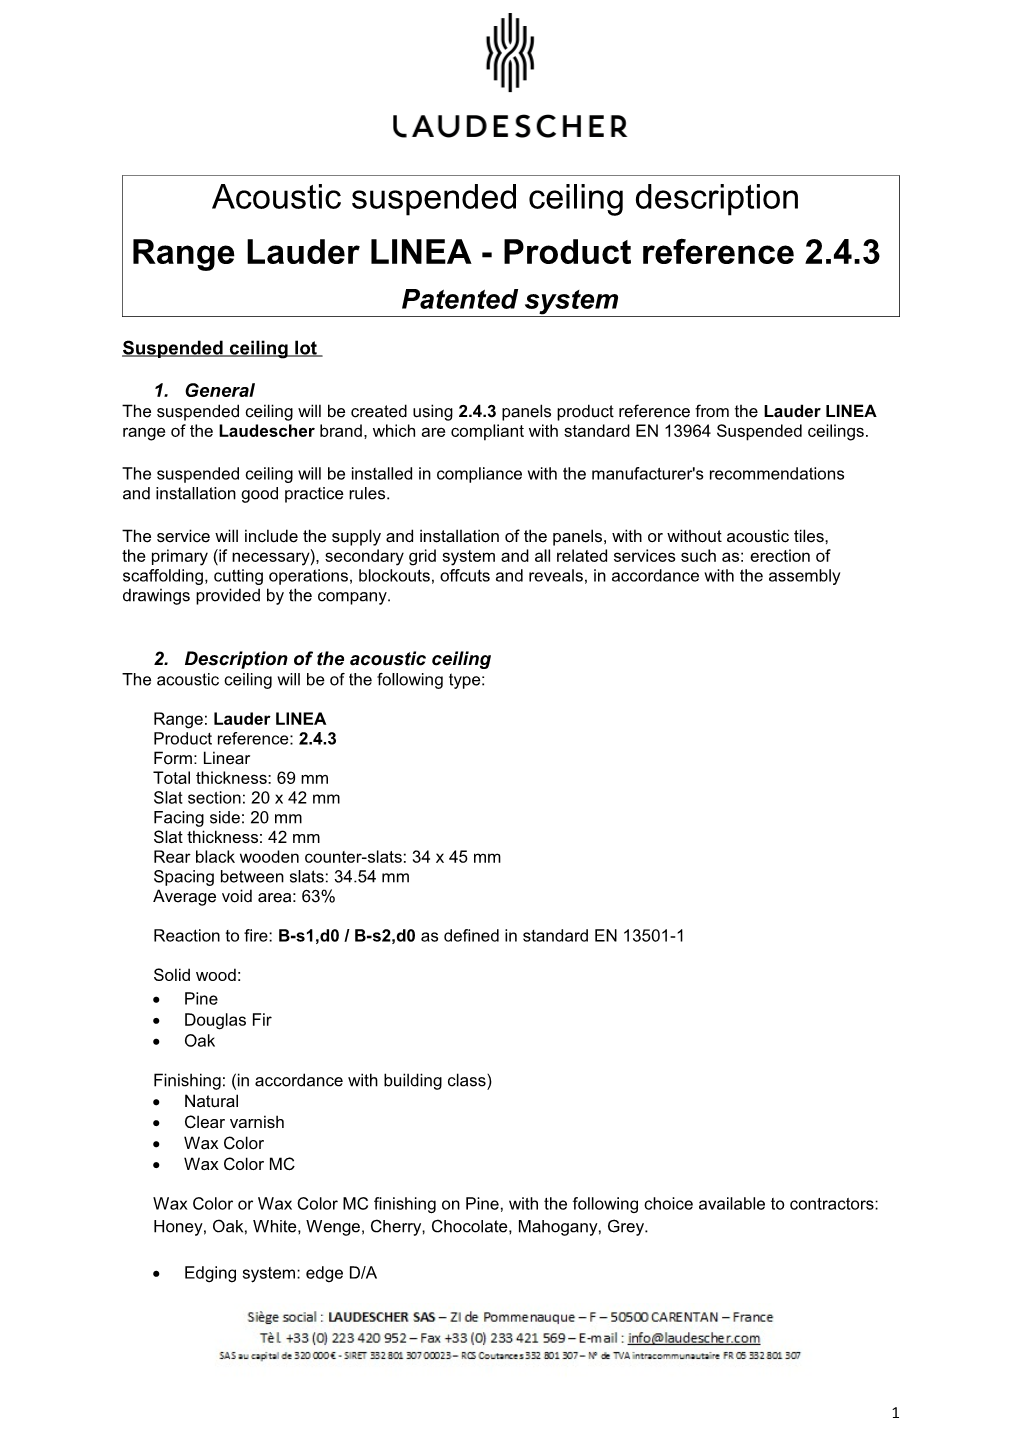 Range Lauder LINEA - Product Reference 2.4.3